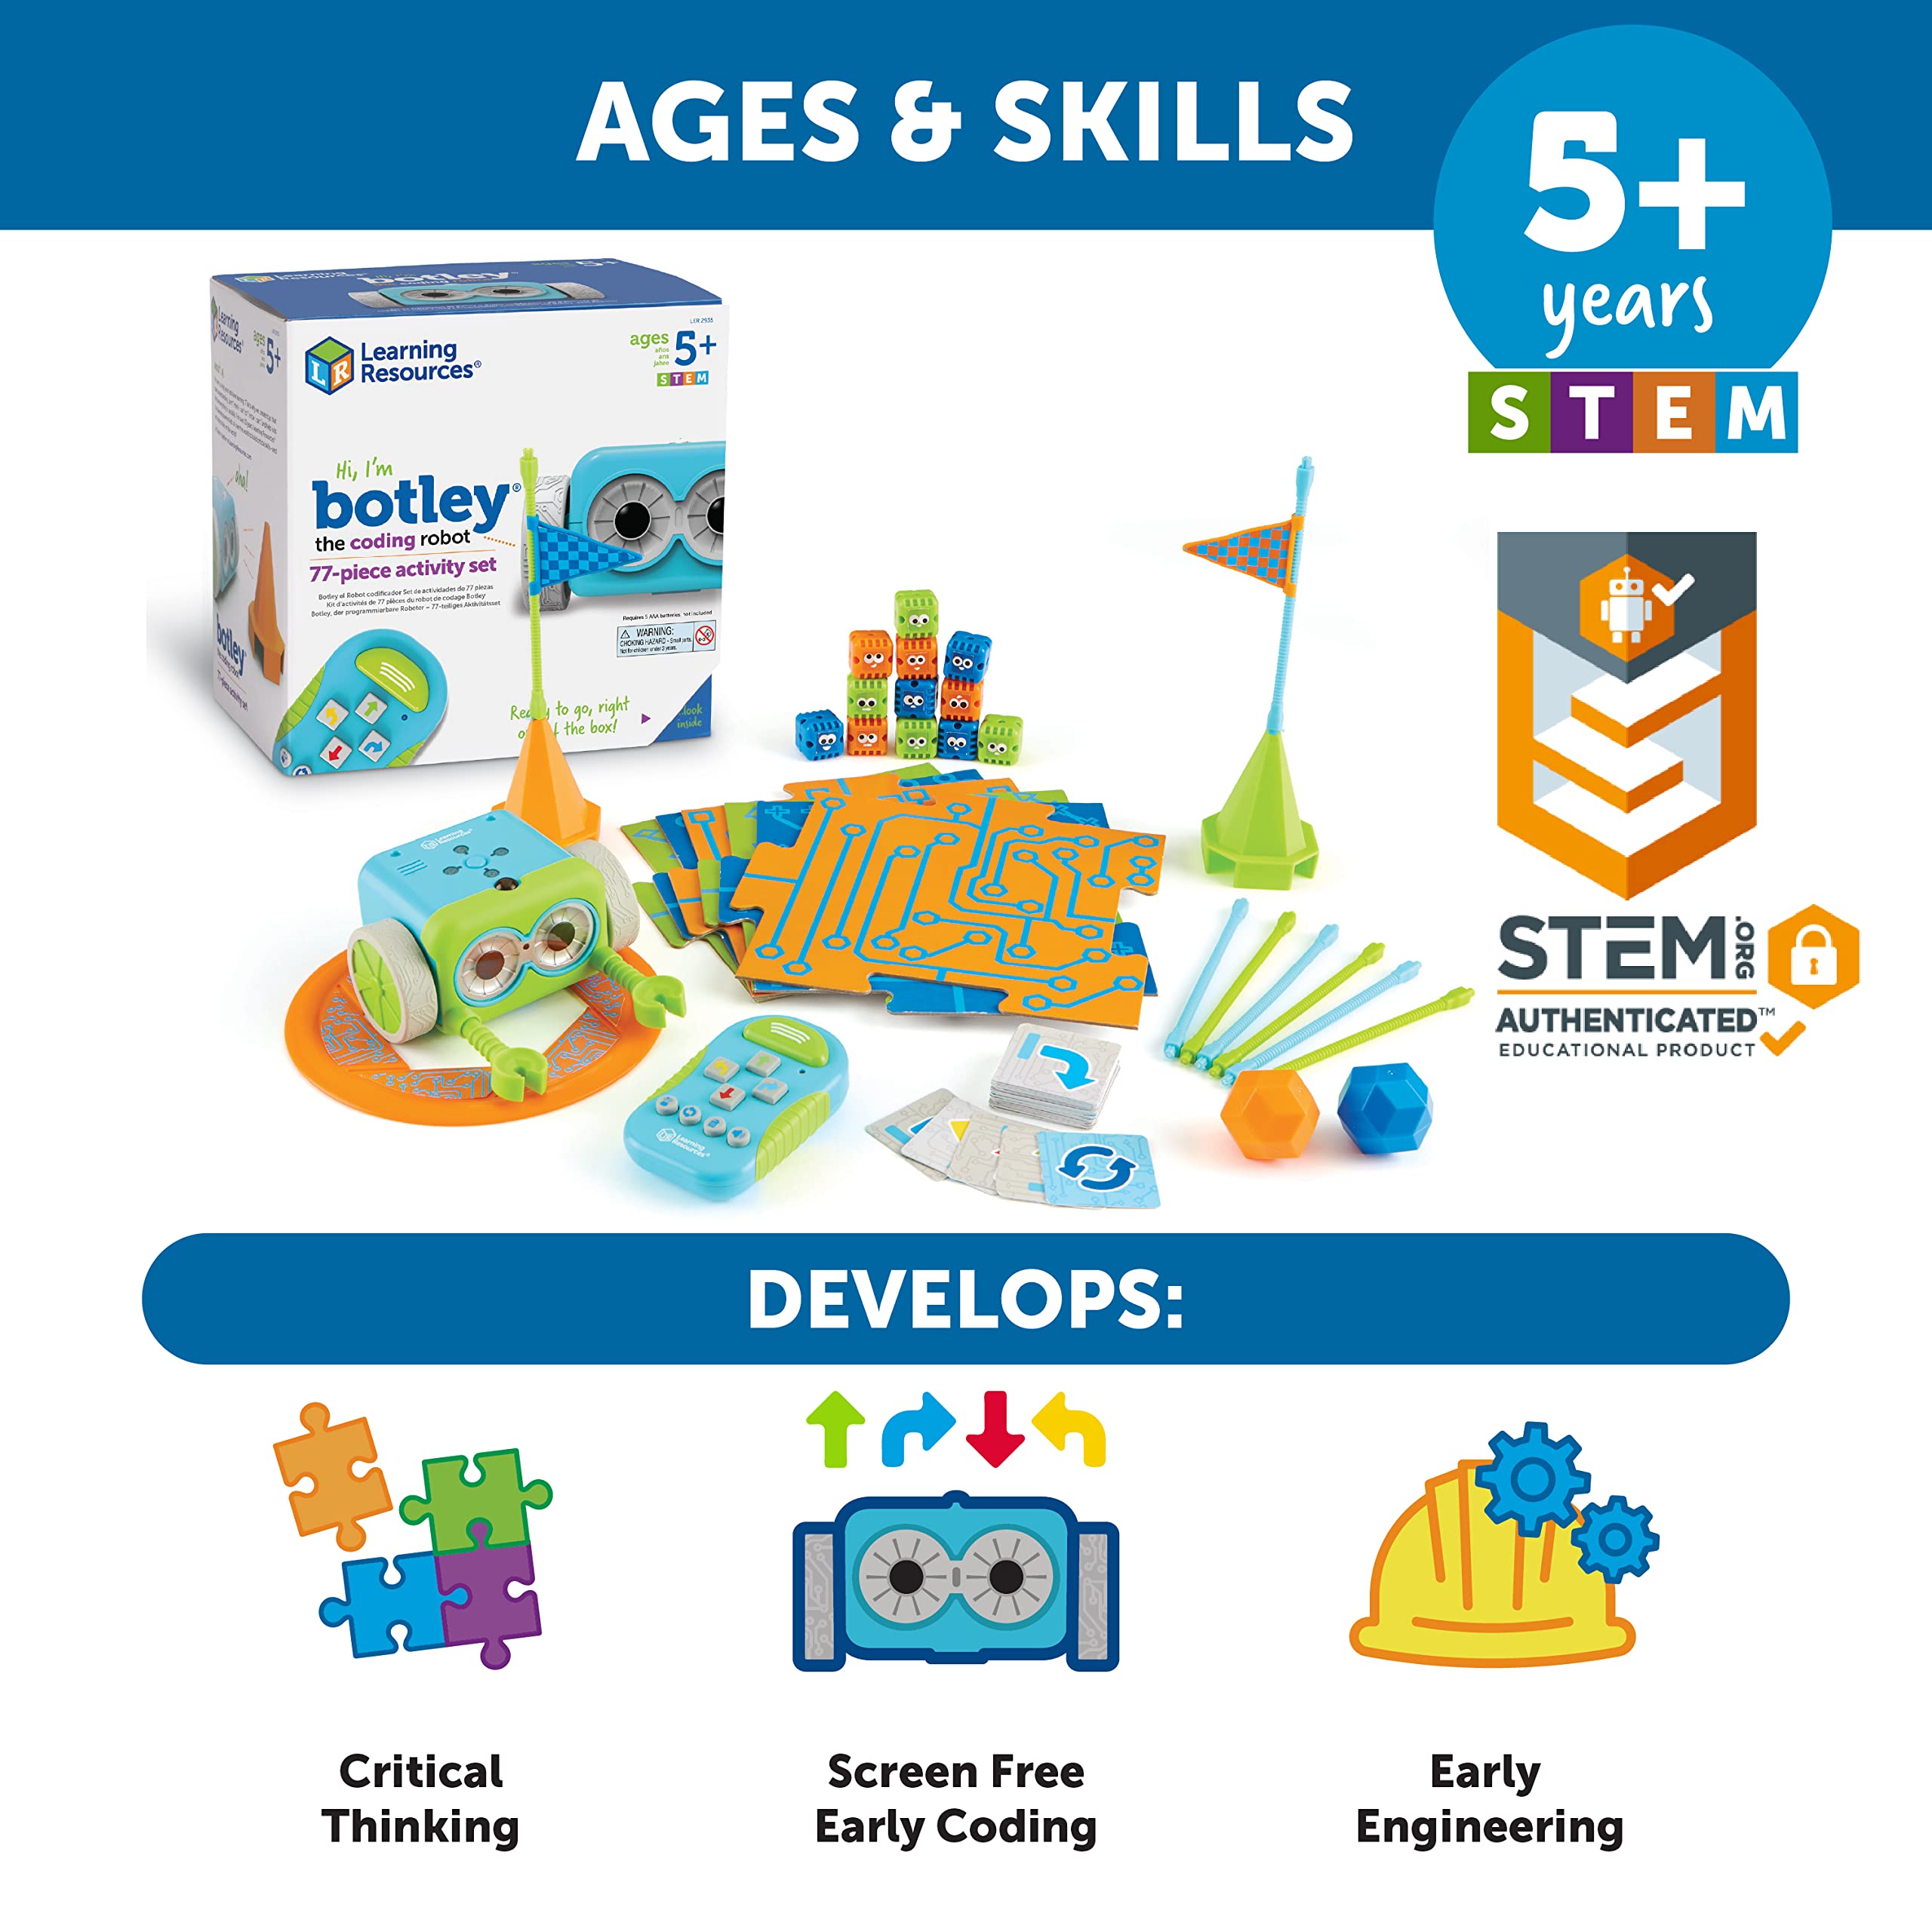 Learning Resources Botley The Coding Robot Activity Set - 77 Pieces, Ages 5+, Screen-Free Coding Robots for Kids, STEM Toys for Kids, Programming for Kids,Back to School Gifts